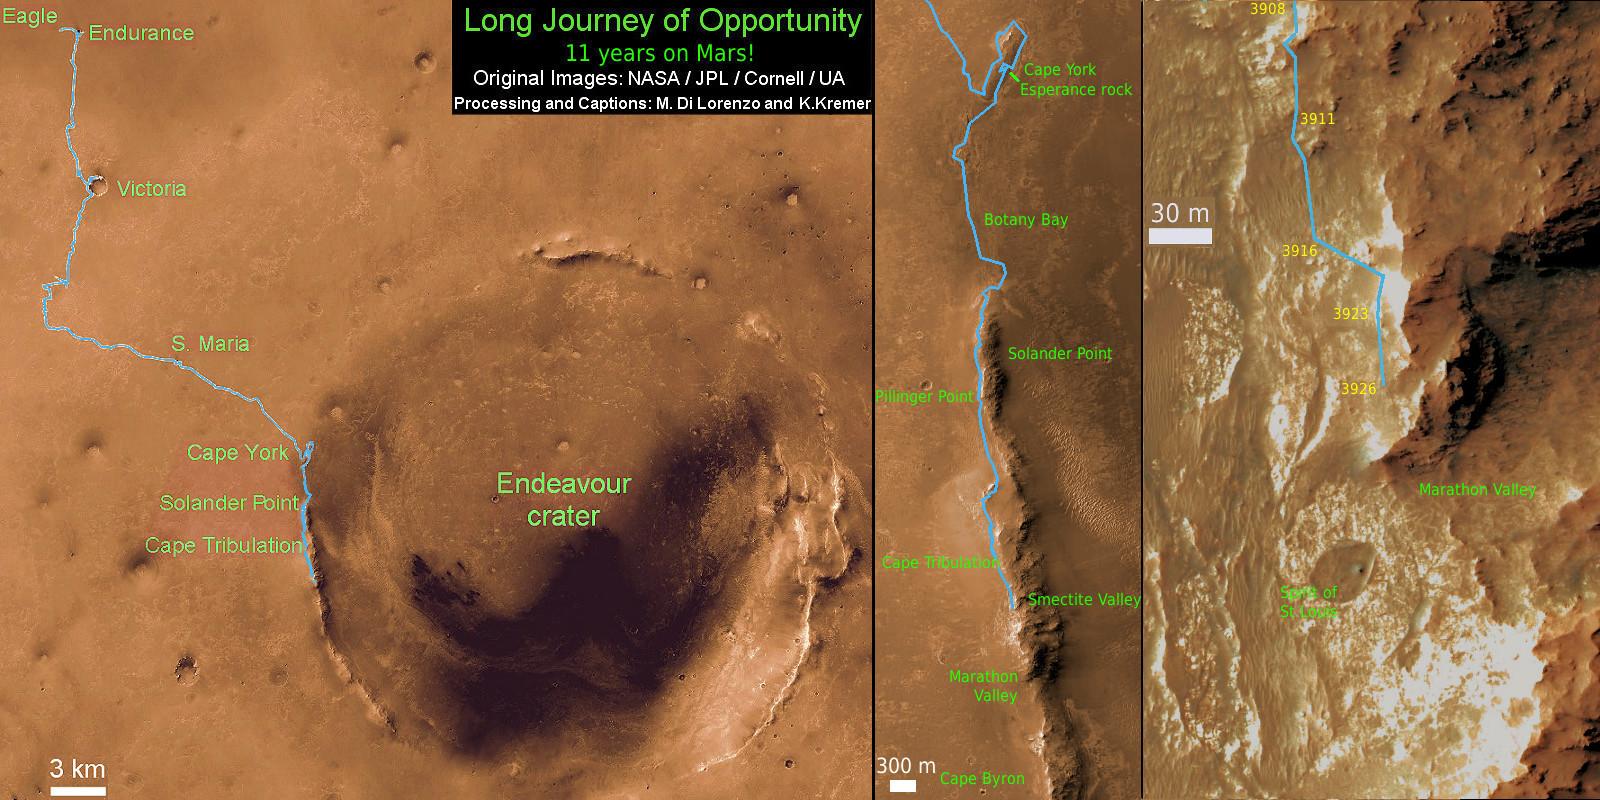 11 Year Traverse Map for NASA’s Opportunity rover from 2004 to 2015. This map shows the entire path the rover has driven during 11 years on Mars and over 3926 Sols, or Martian days, since landing inside Eagle Crater on Jan 24, 2004 to current location just past the Cape Tribulation summit at the western rim of Endeavour Crater near Marathon Valley. Rover marked 11 anniversary on Sol 3911. Opportunity discovered clay minerals at Esperance – indicative of a habitable zone - and is searching for more on the road ahead at Marathon Valley.  Credit: NASA/JPL/Cornell/ASU/Marco Di Lorenzo/Ken Kremer – kenkremer.com